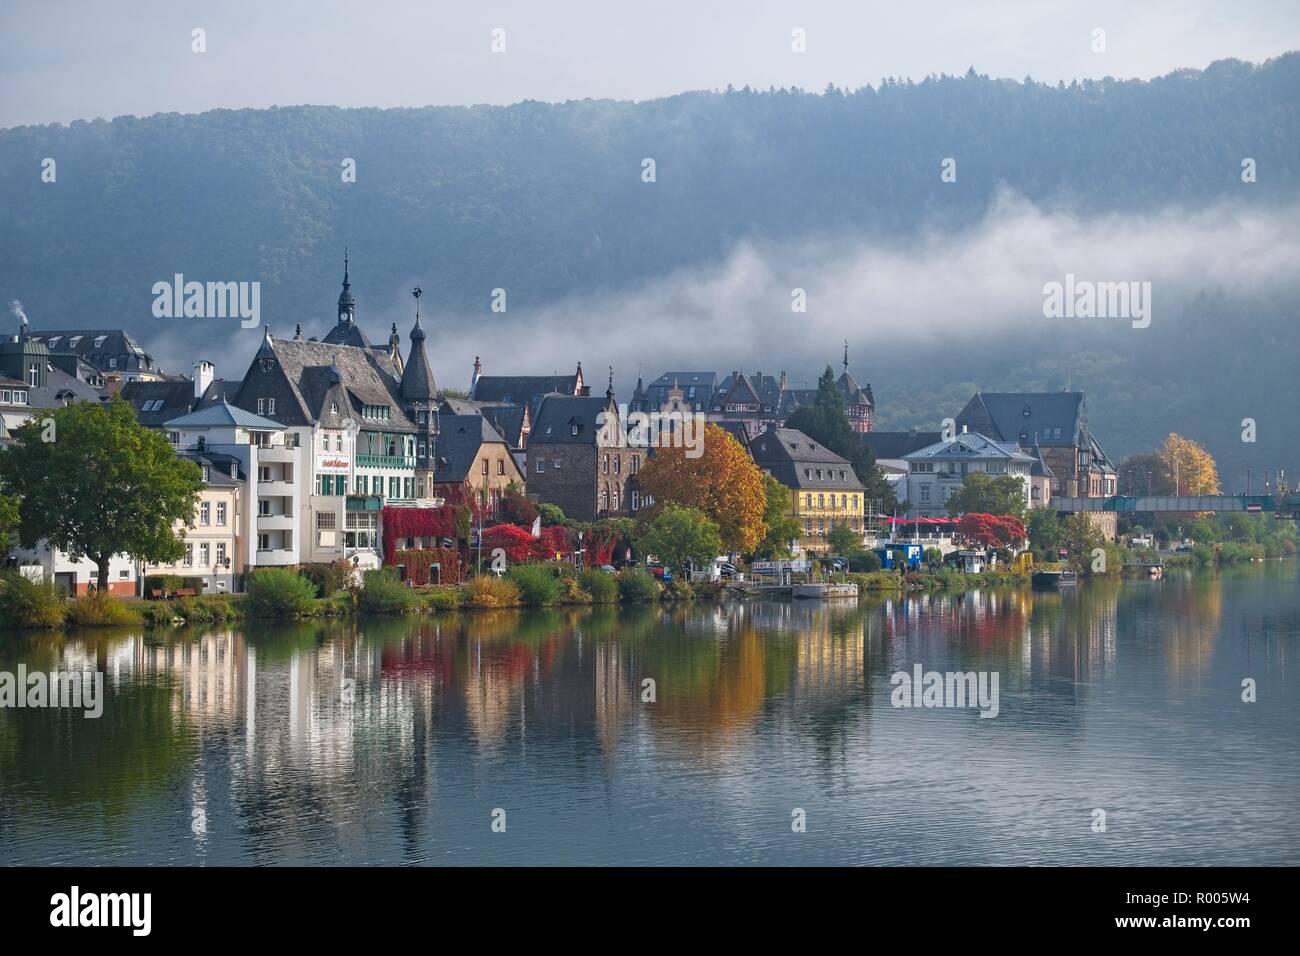 TRABEN RIVER FRONT FROM TRABECH ACROSS THE RIVER MOSEL VALLEY GERMANY Stock Photo